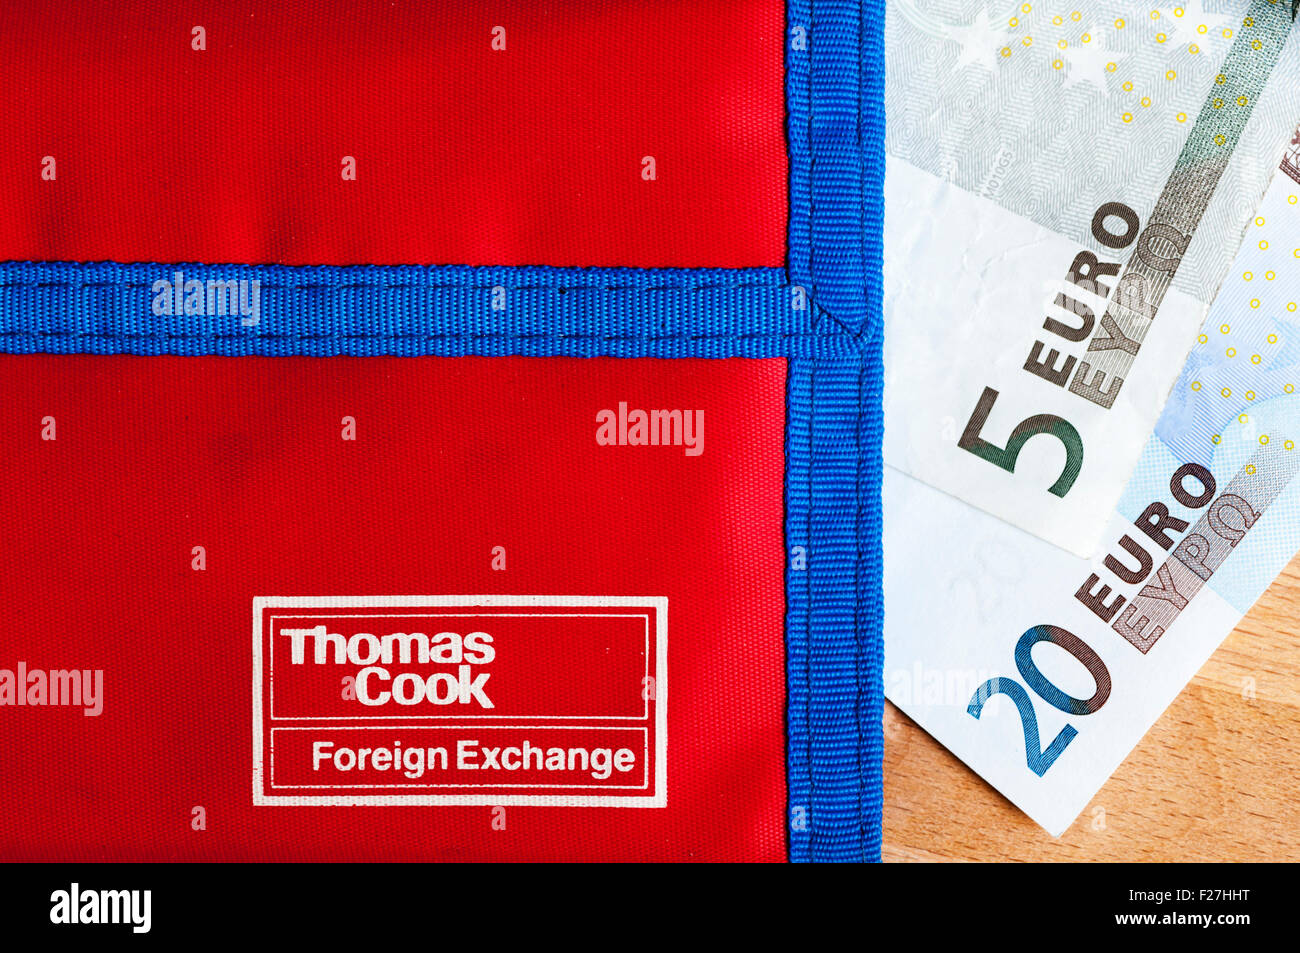 20 euro and 5 euro notes next to a Thomas Cook wallet for holiday money. Stock Photo